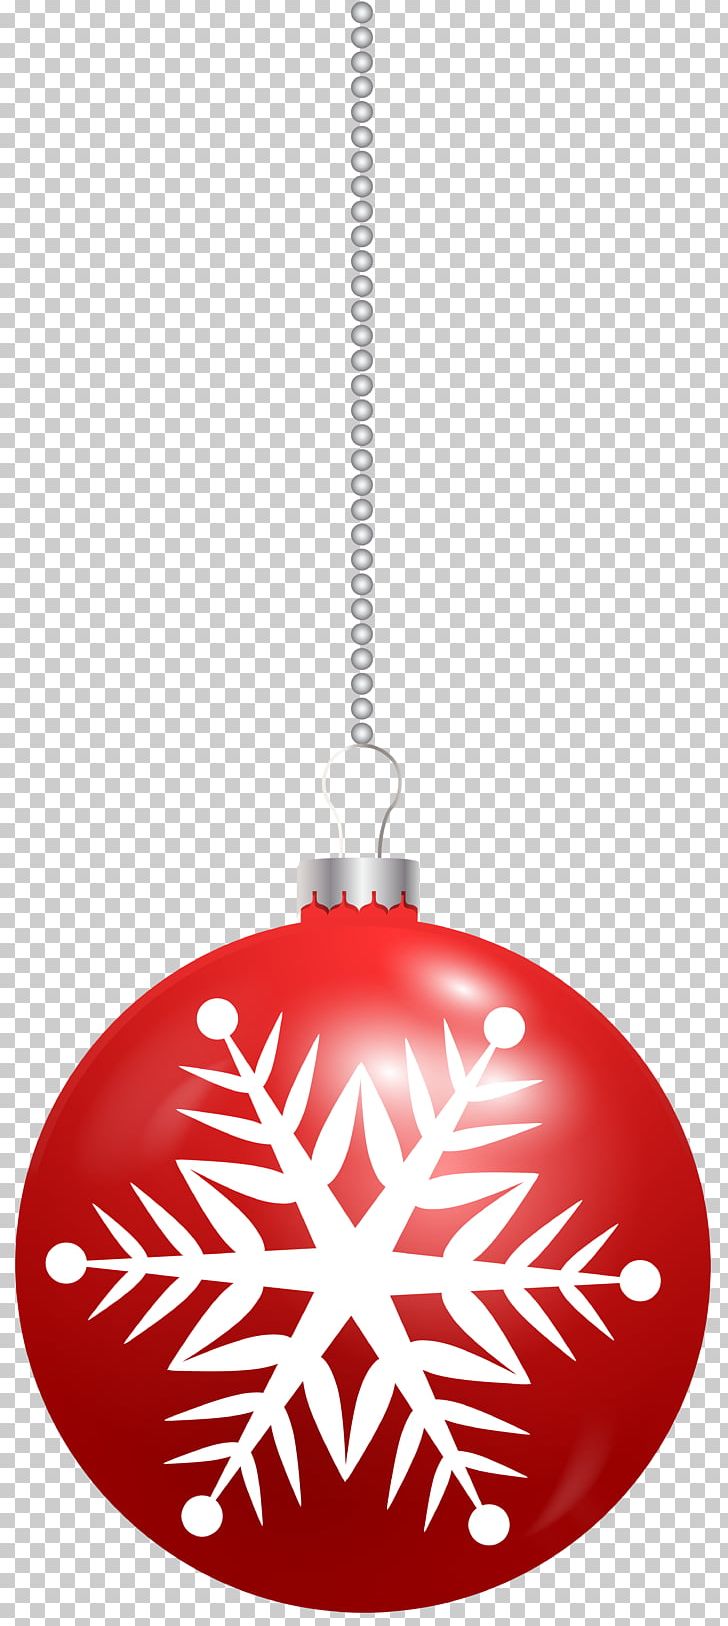 Volvo Trucks Snowflake PNG, Clipart, Art Christmas, Christmas, Christmas Ball, Christmas Clipart, Christmas Decoration Free PNG Download